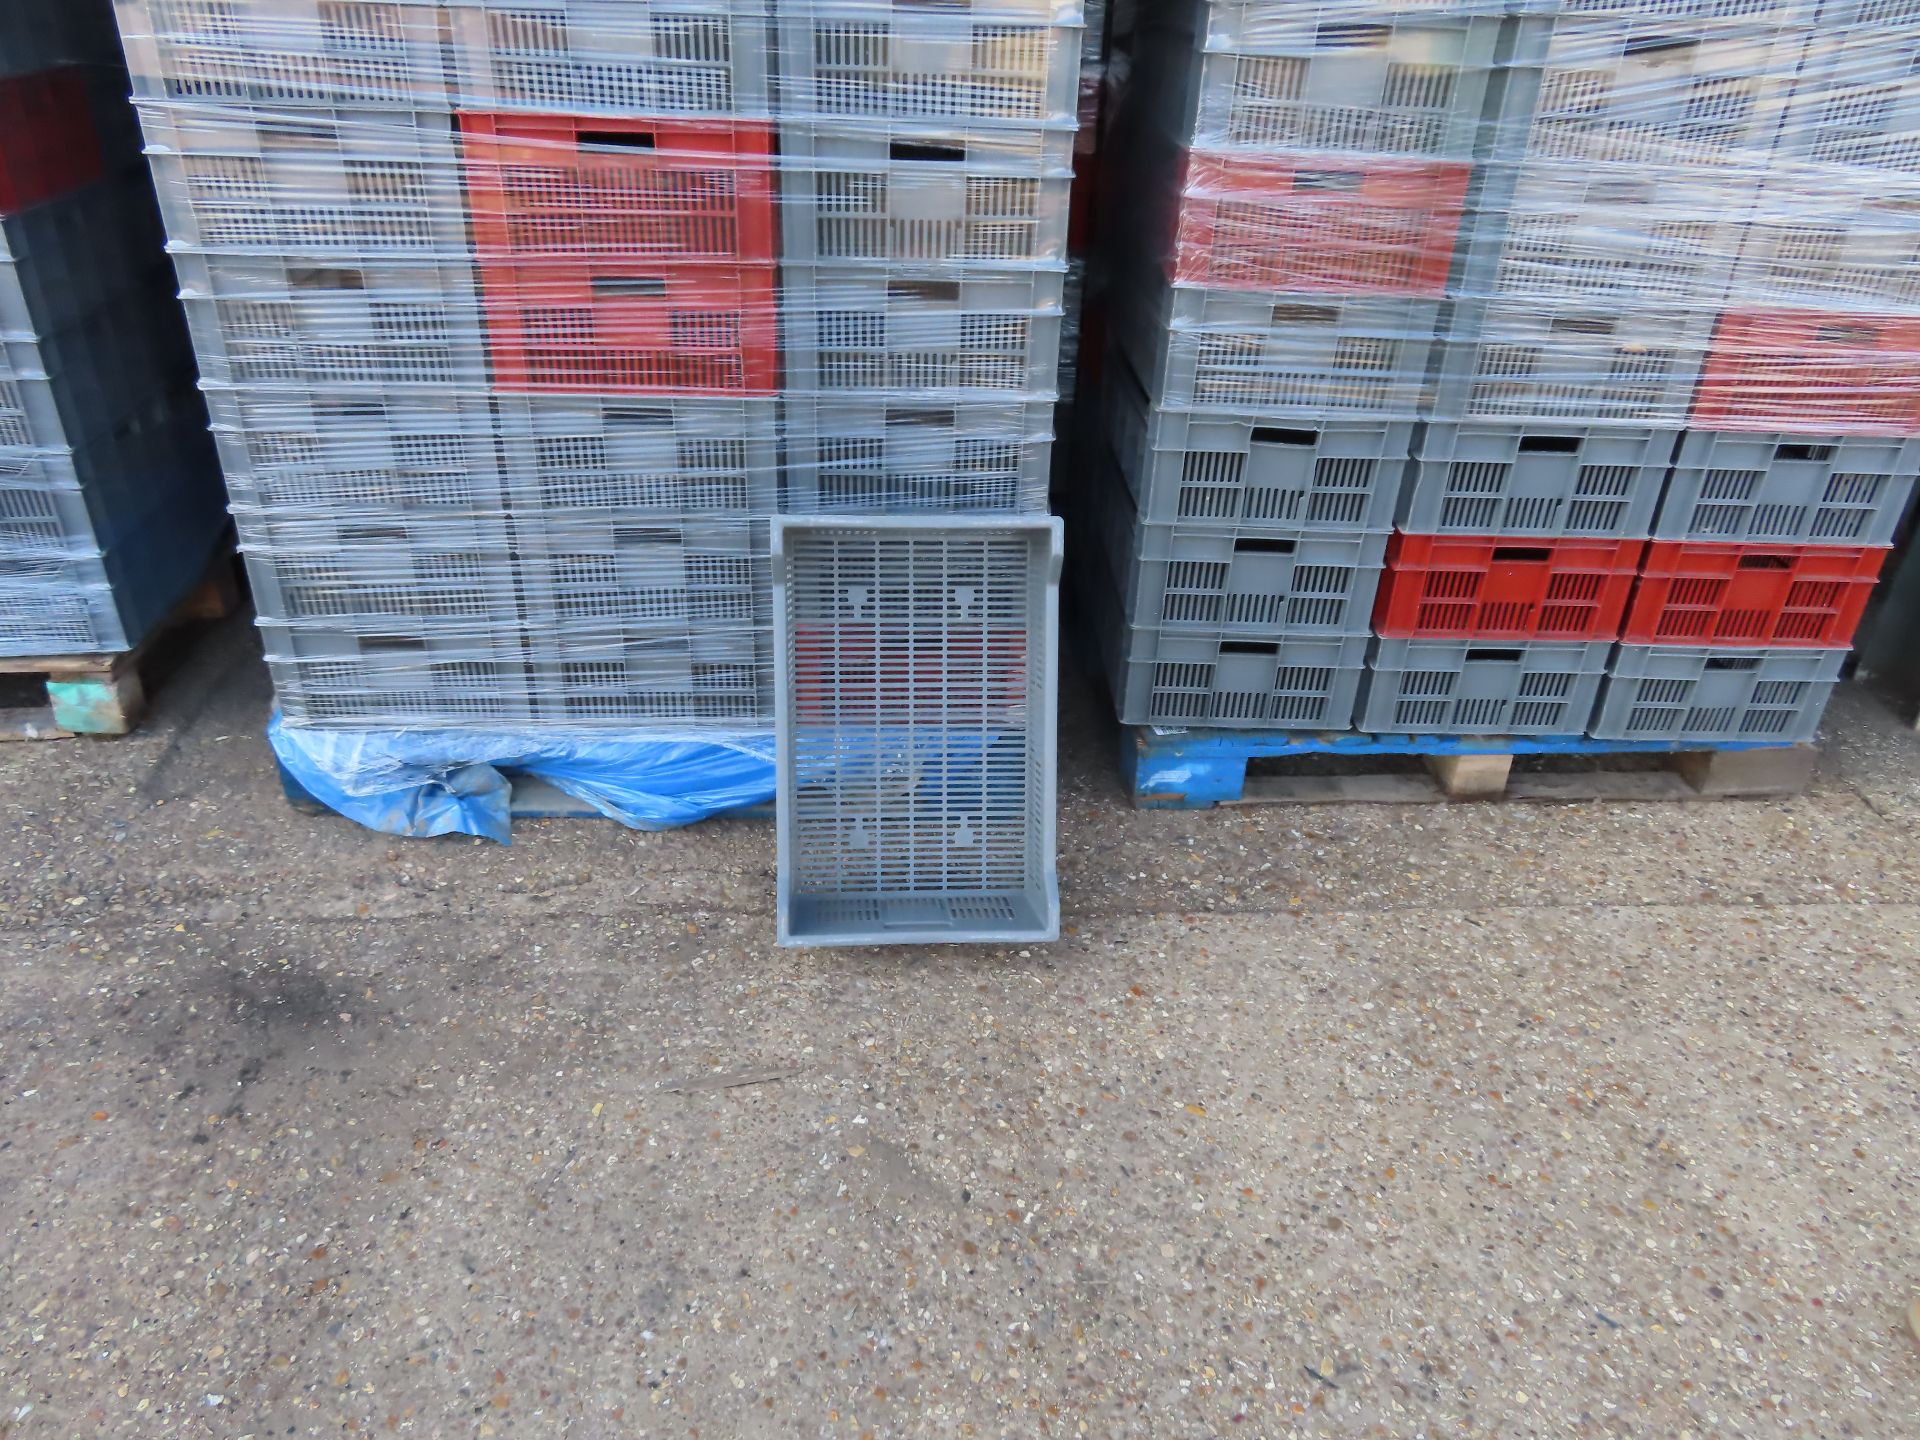 4 X PALLETS OF PLASTIC TRAYS. TOTAL 200 TRAYS. - Image 2 of 2